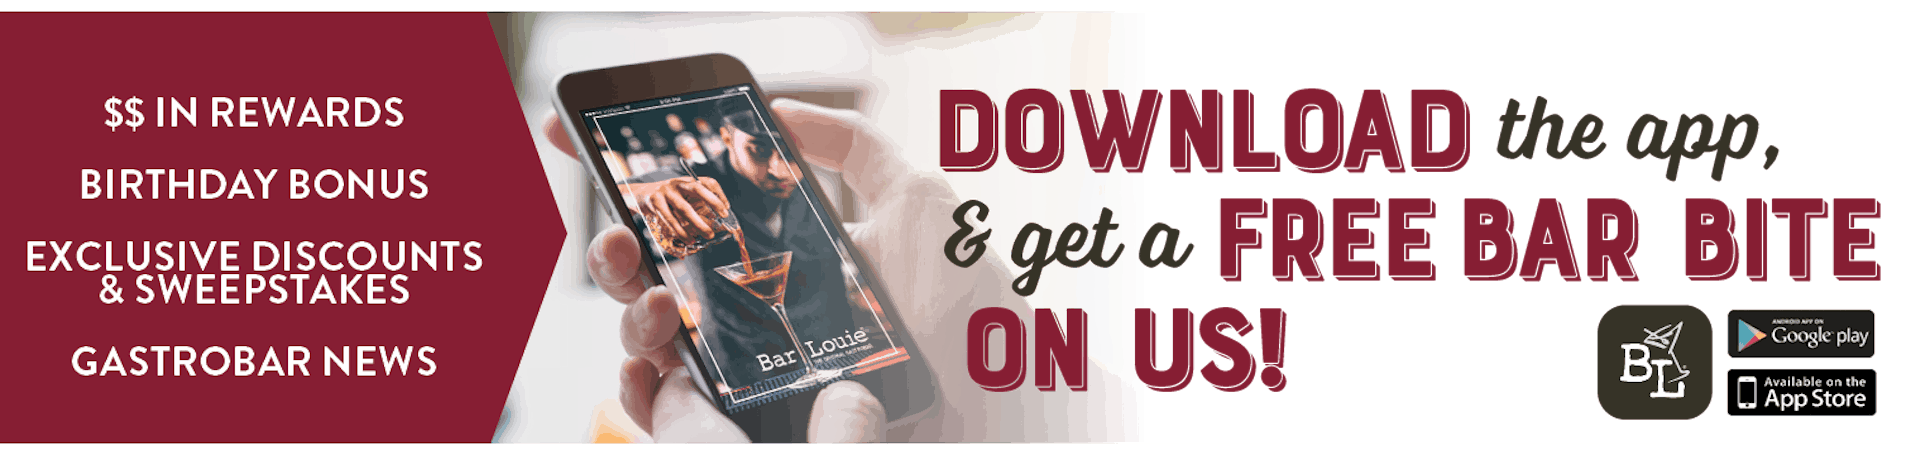 Download the app & get a Free Bar Bite on us!